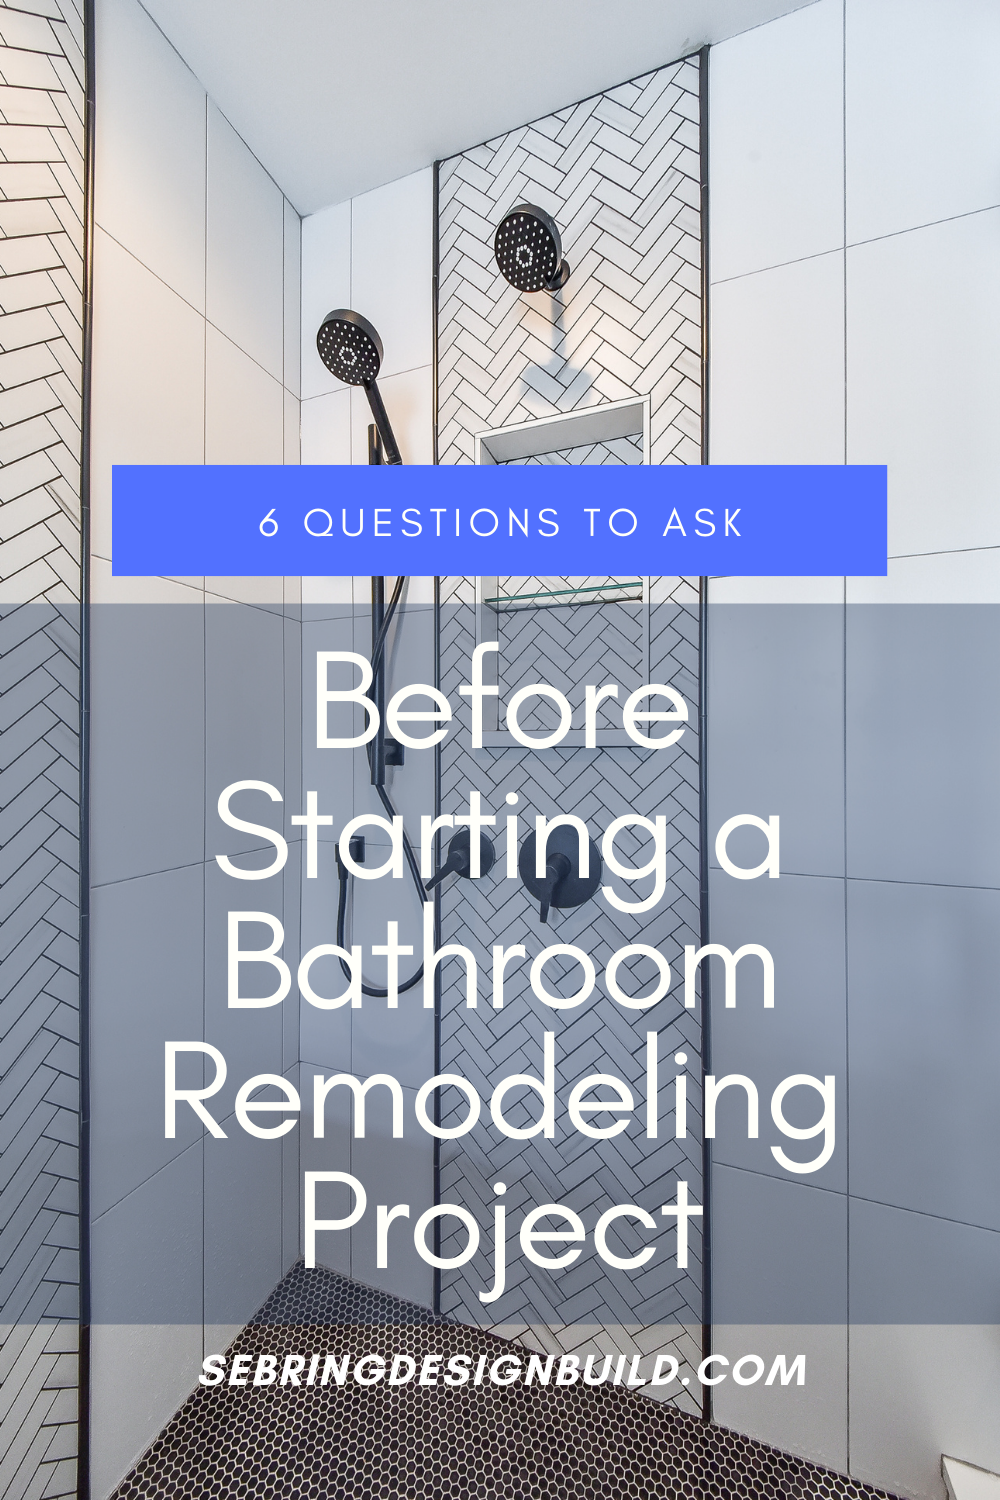 Questions to Ask Before Starting a Bathroom Remodeling Project